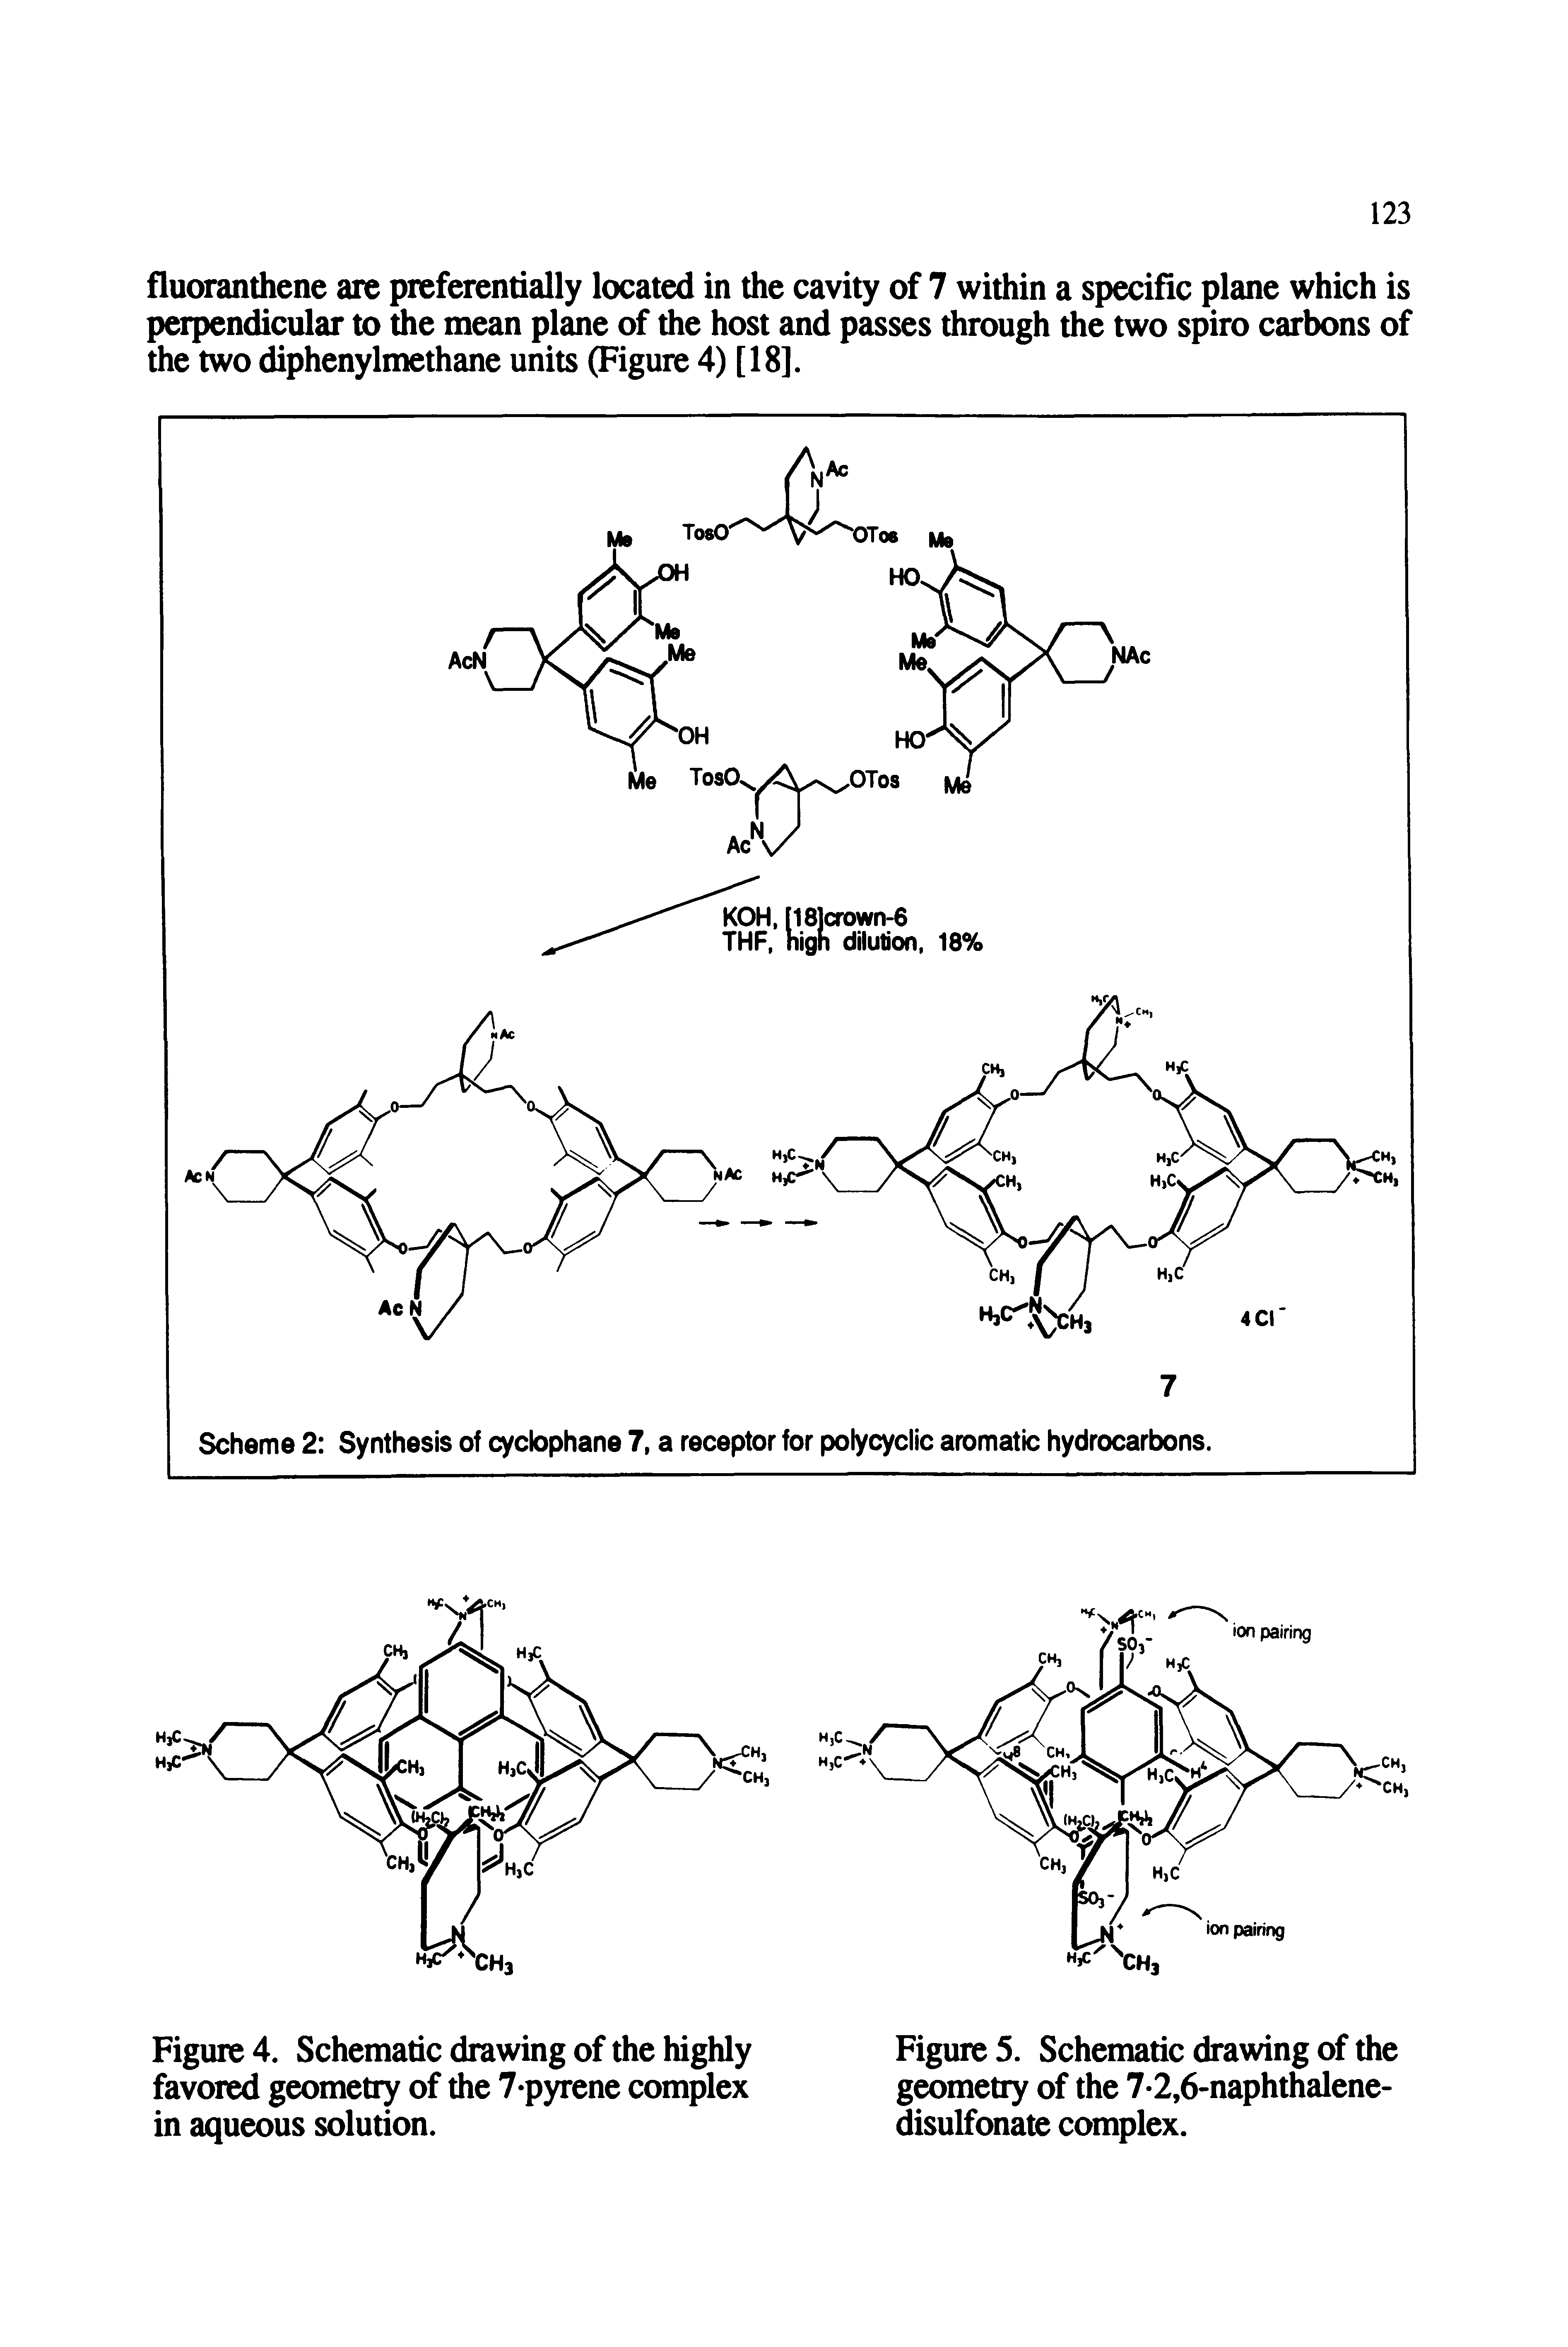 Figure 4. Schematic drawing of the highly favored geometry of the 7-pyrene complex in aqueous solution.